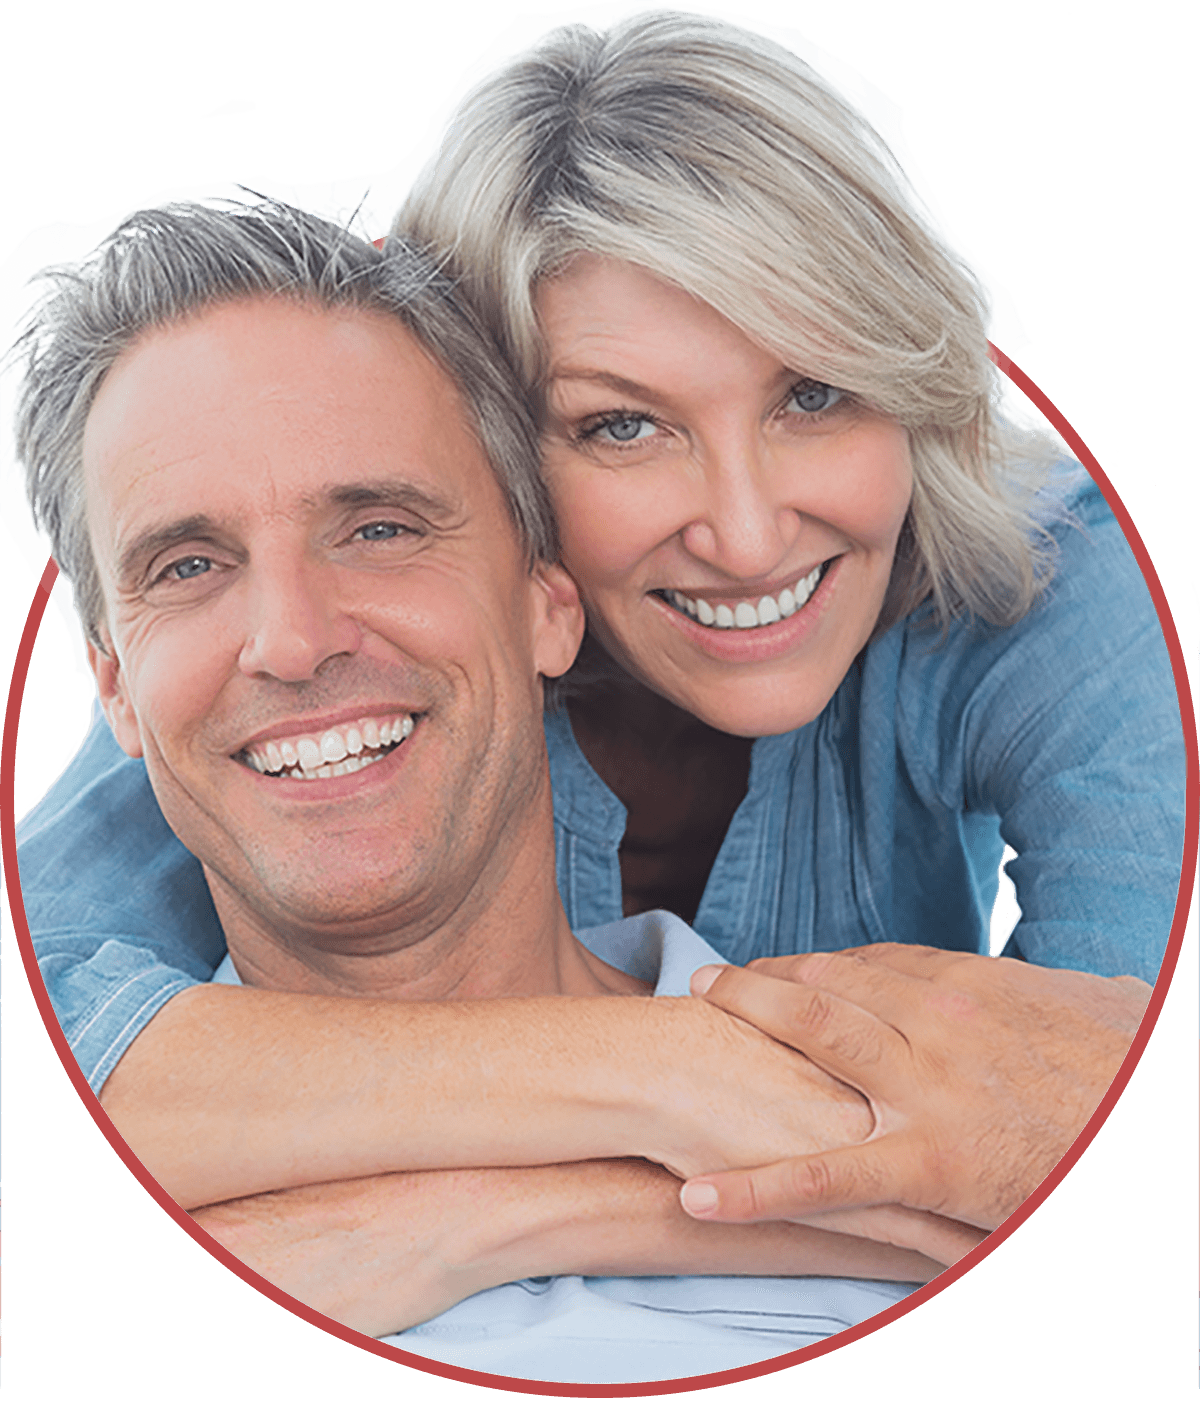 dating sites for over 50s australia